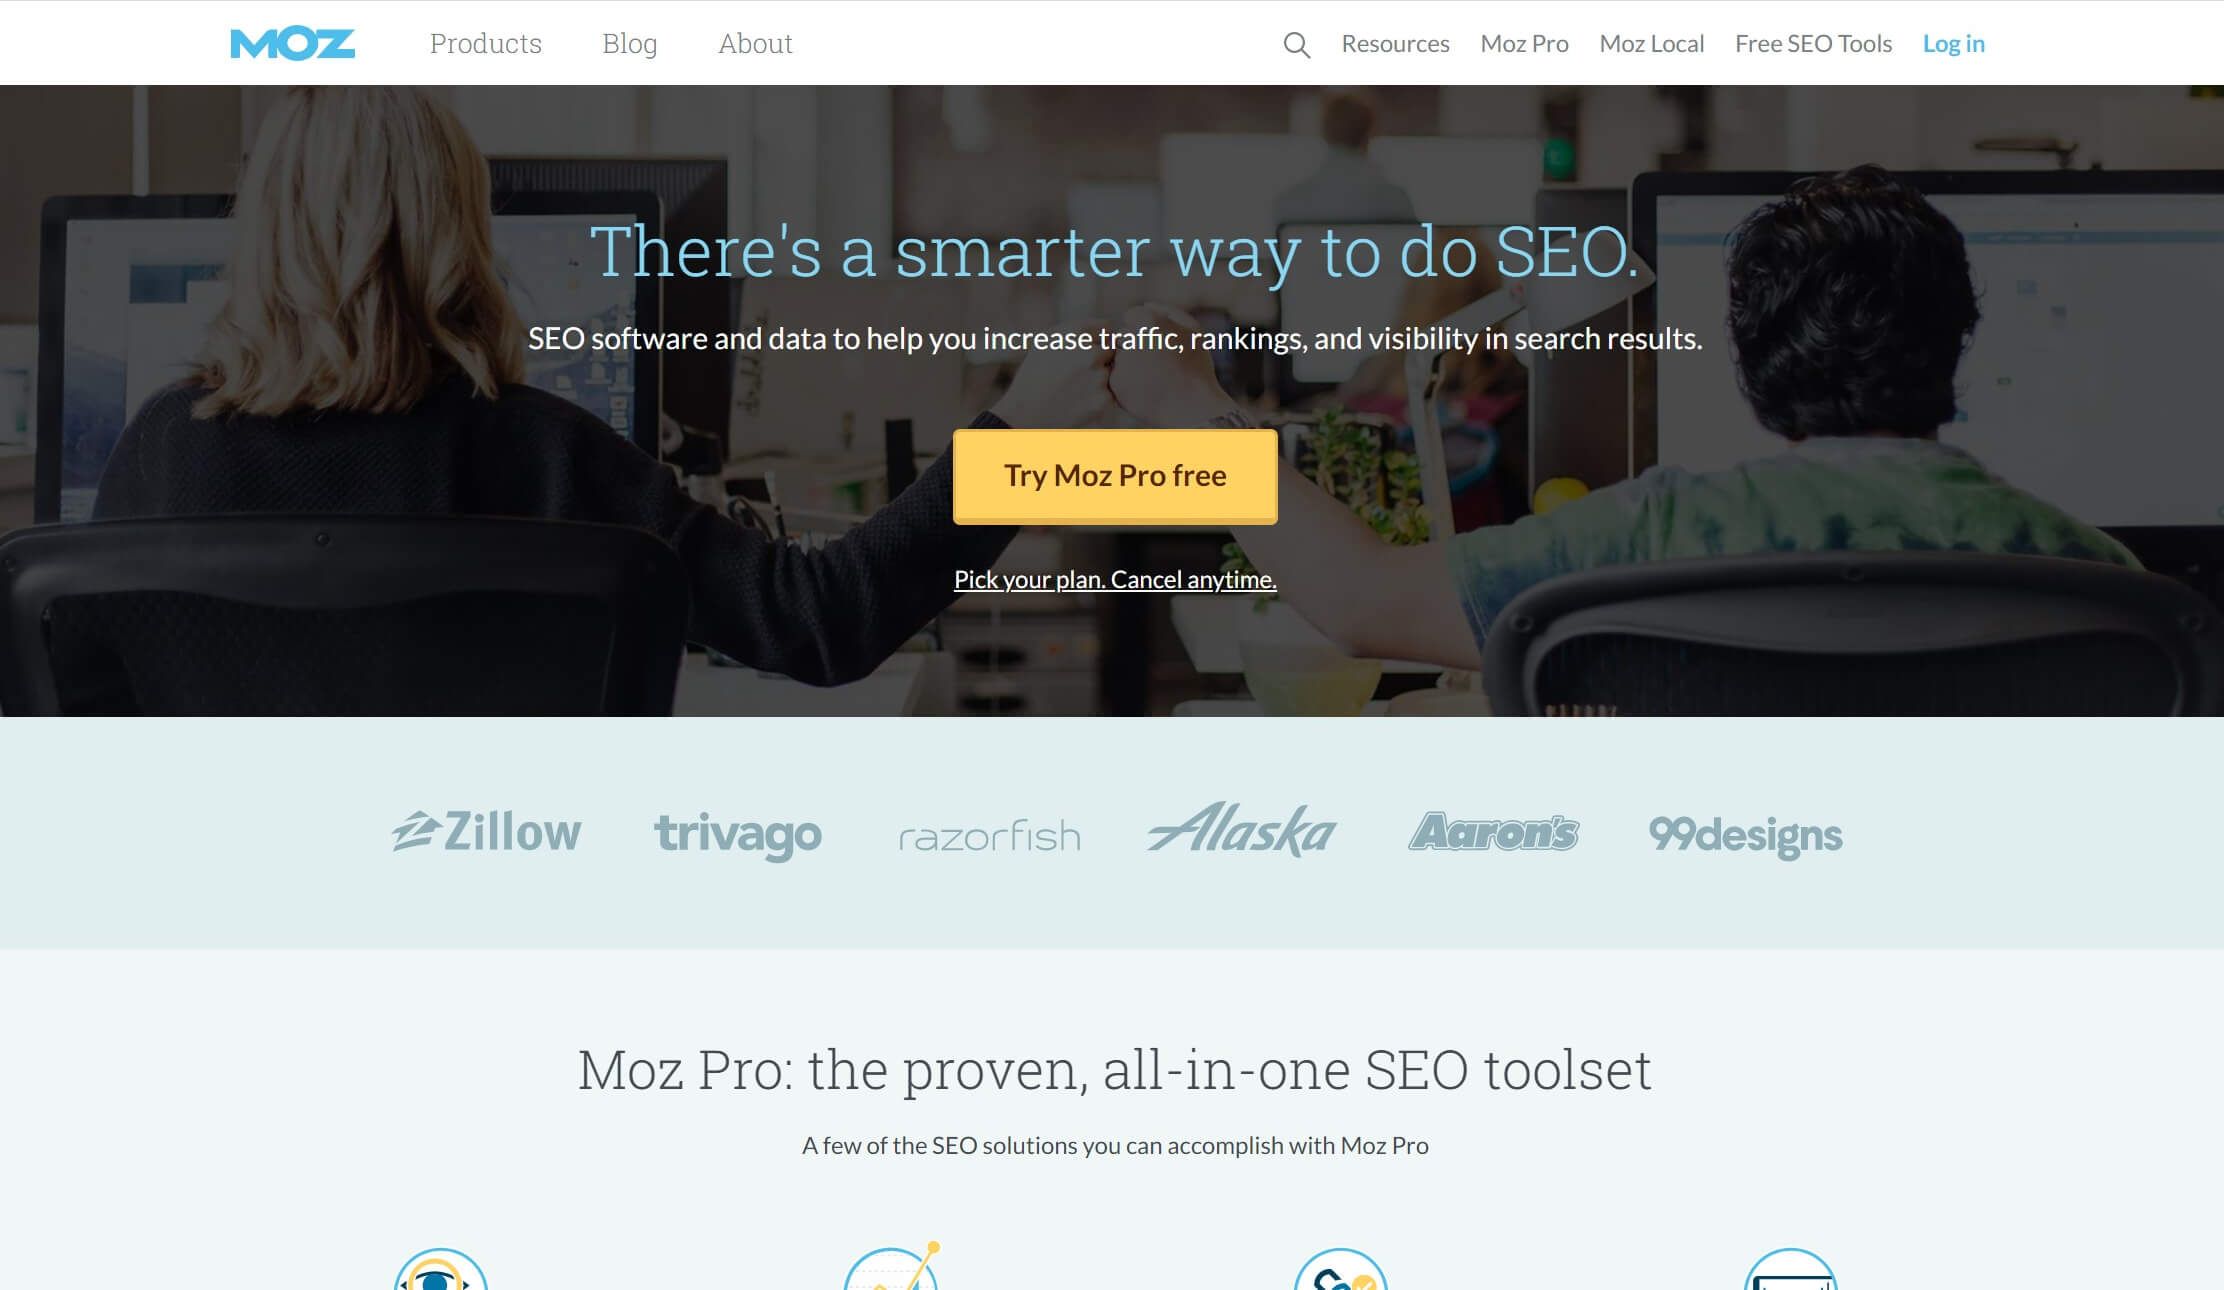 The Moz Pro home page.